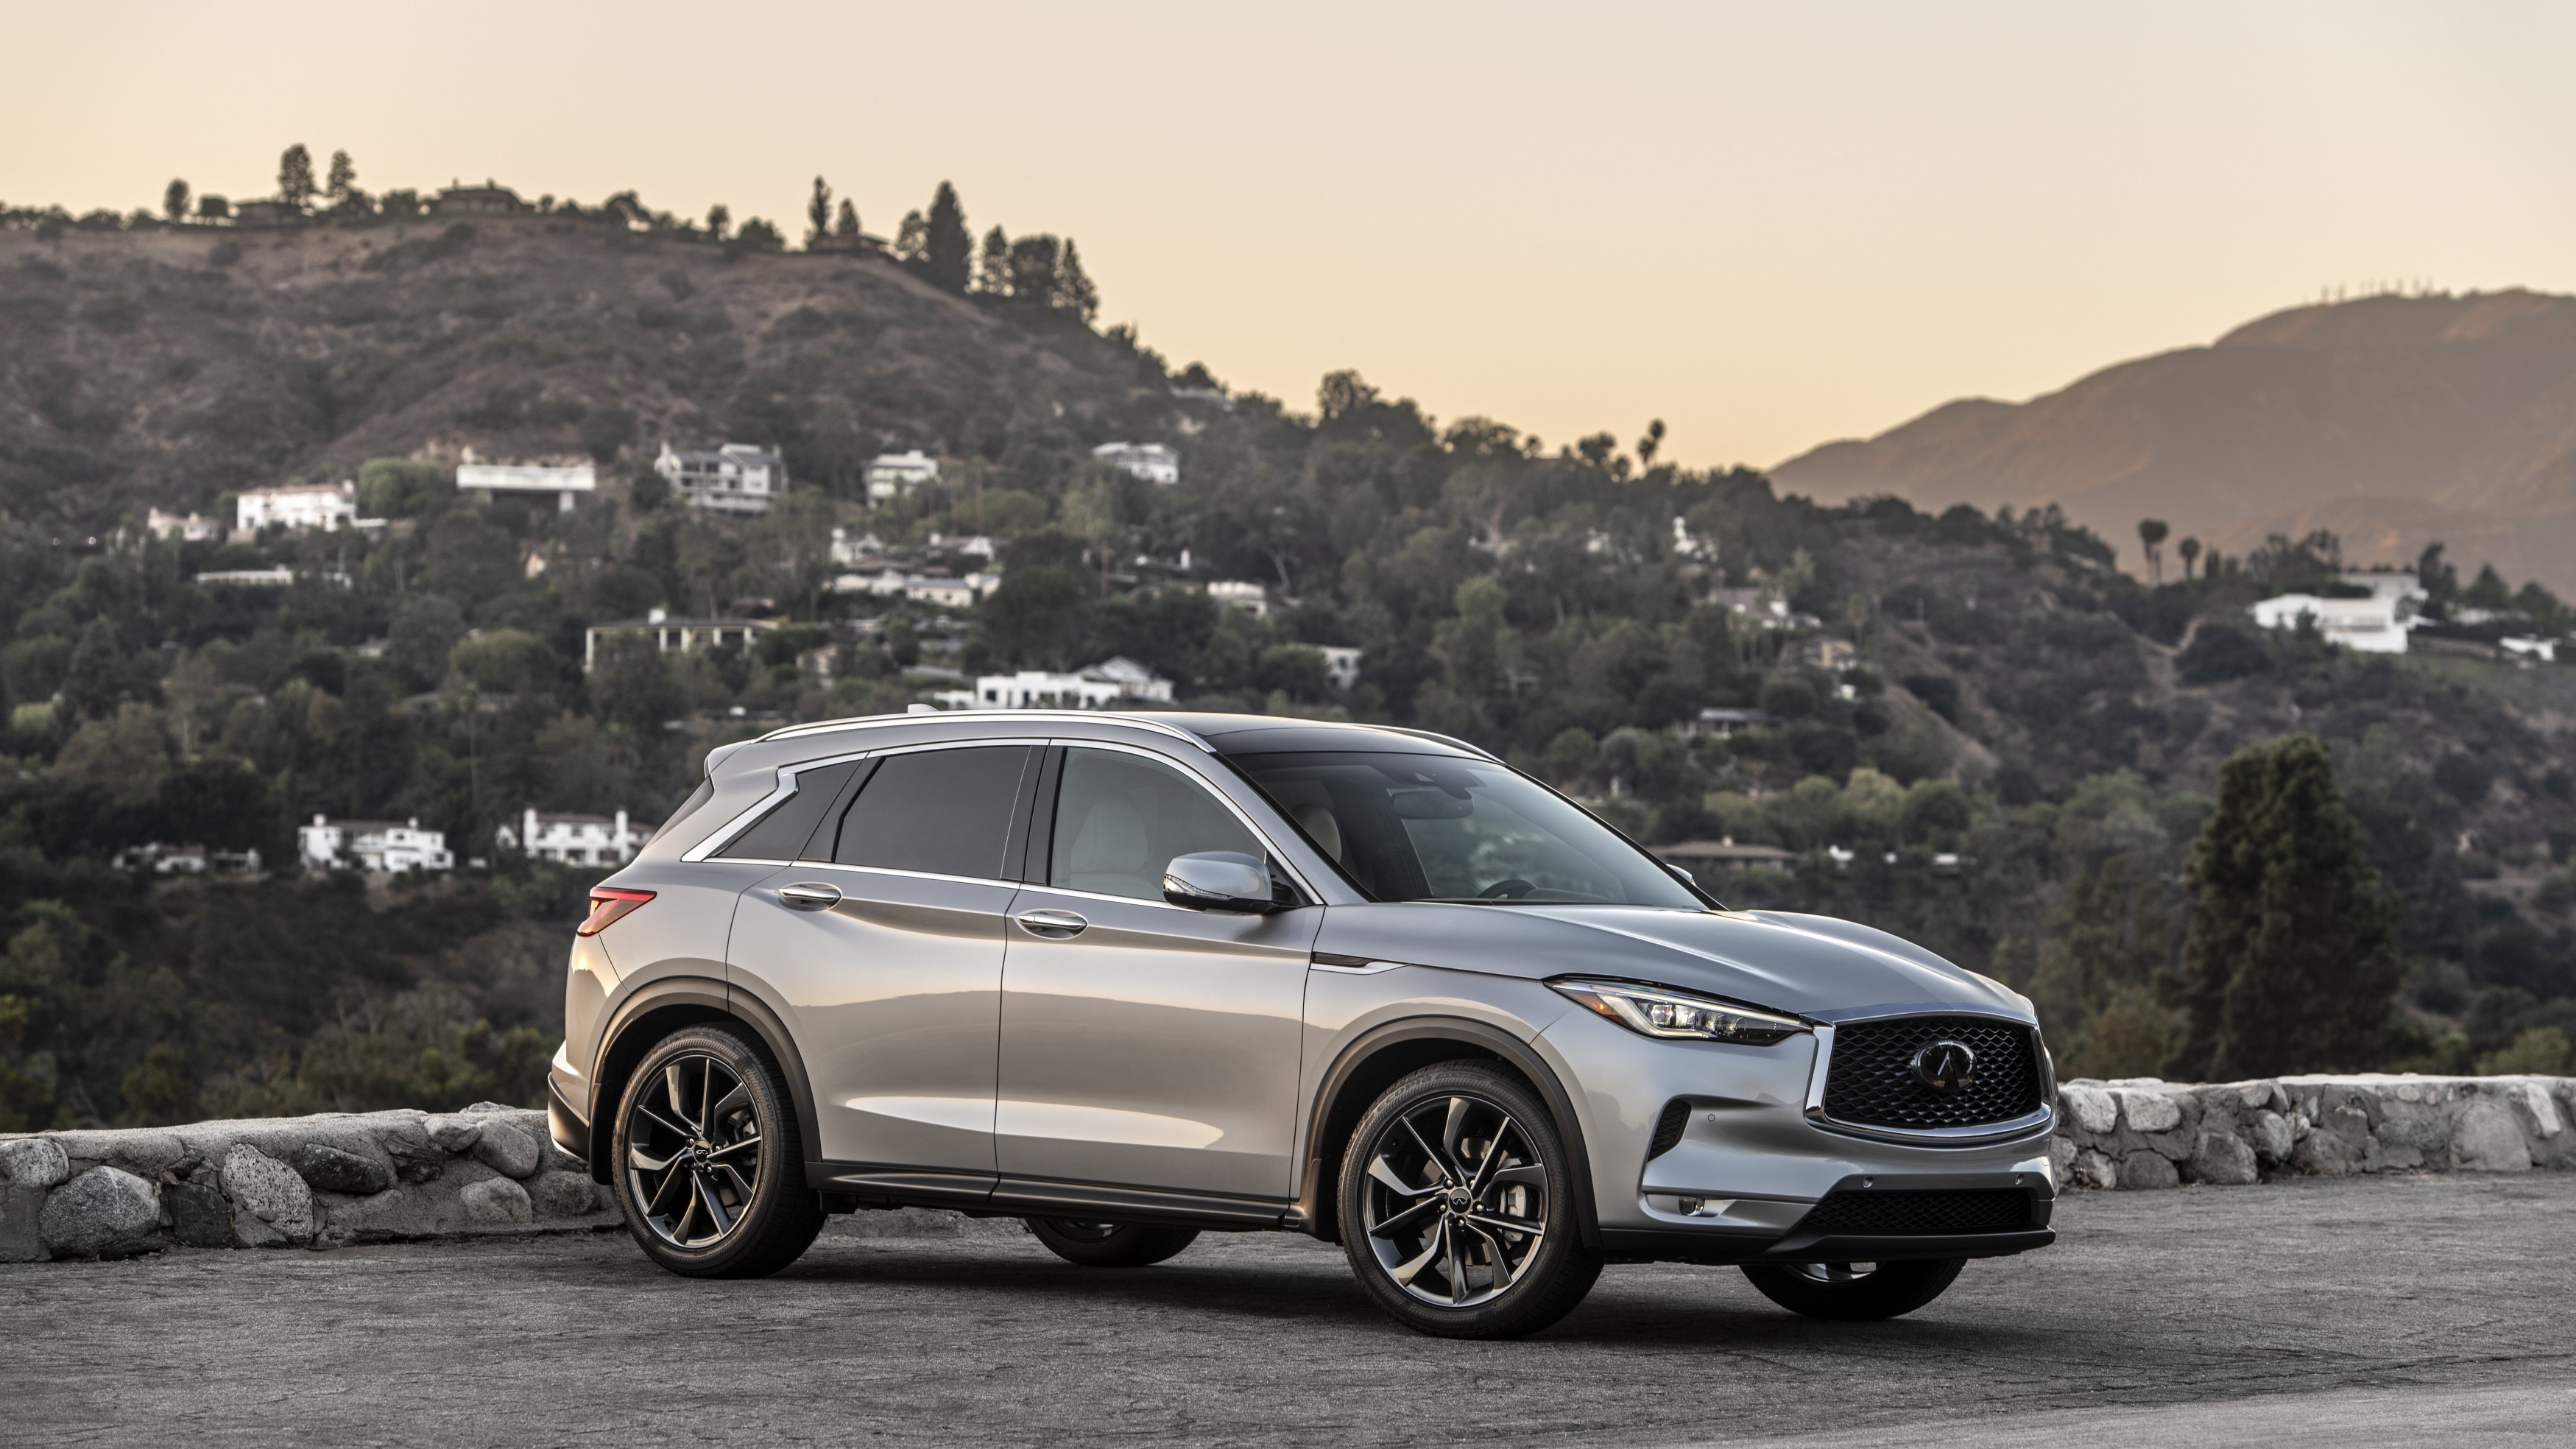 Infiniti Further Upgrades Compact QX50 for 2021